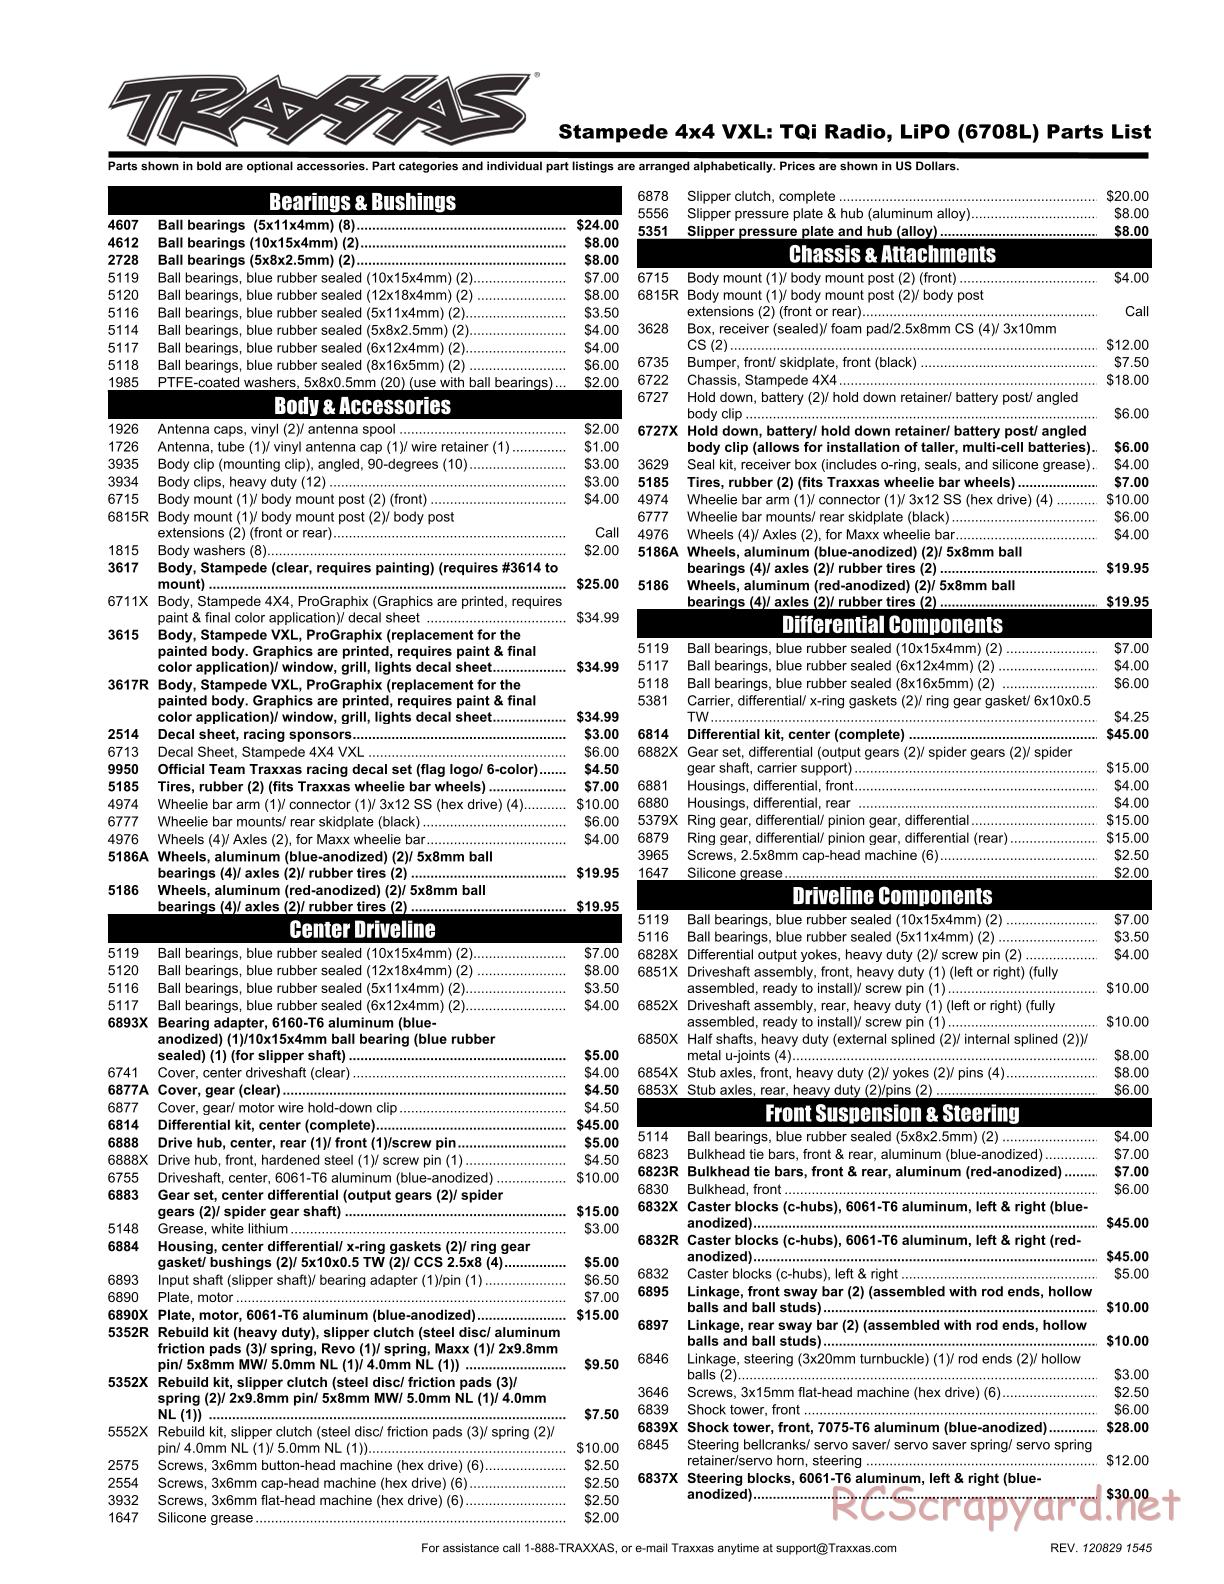 Traxxas - Stampede 4x4 VXL (2012) - Parts List - Page 1